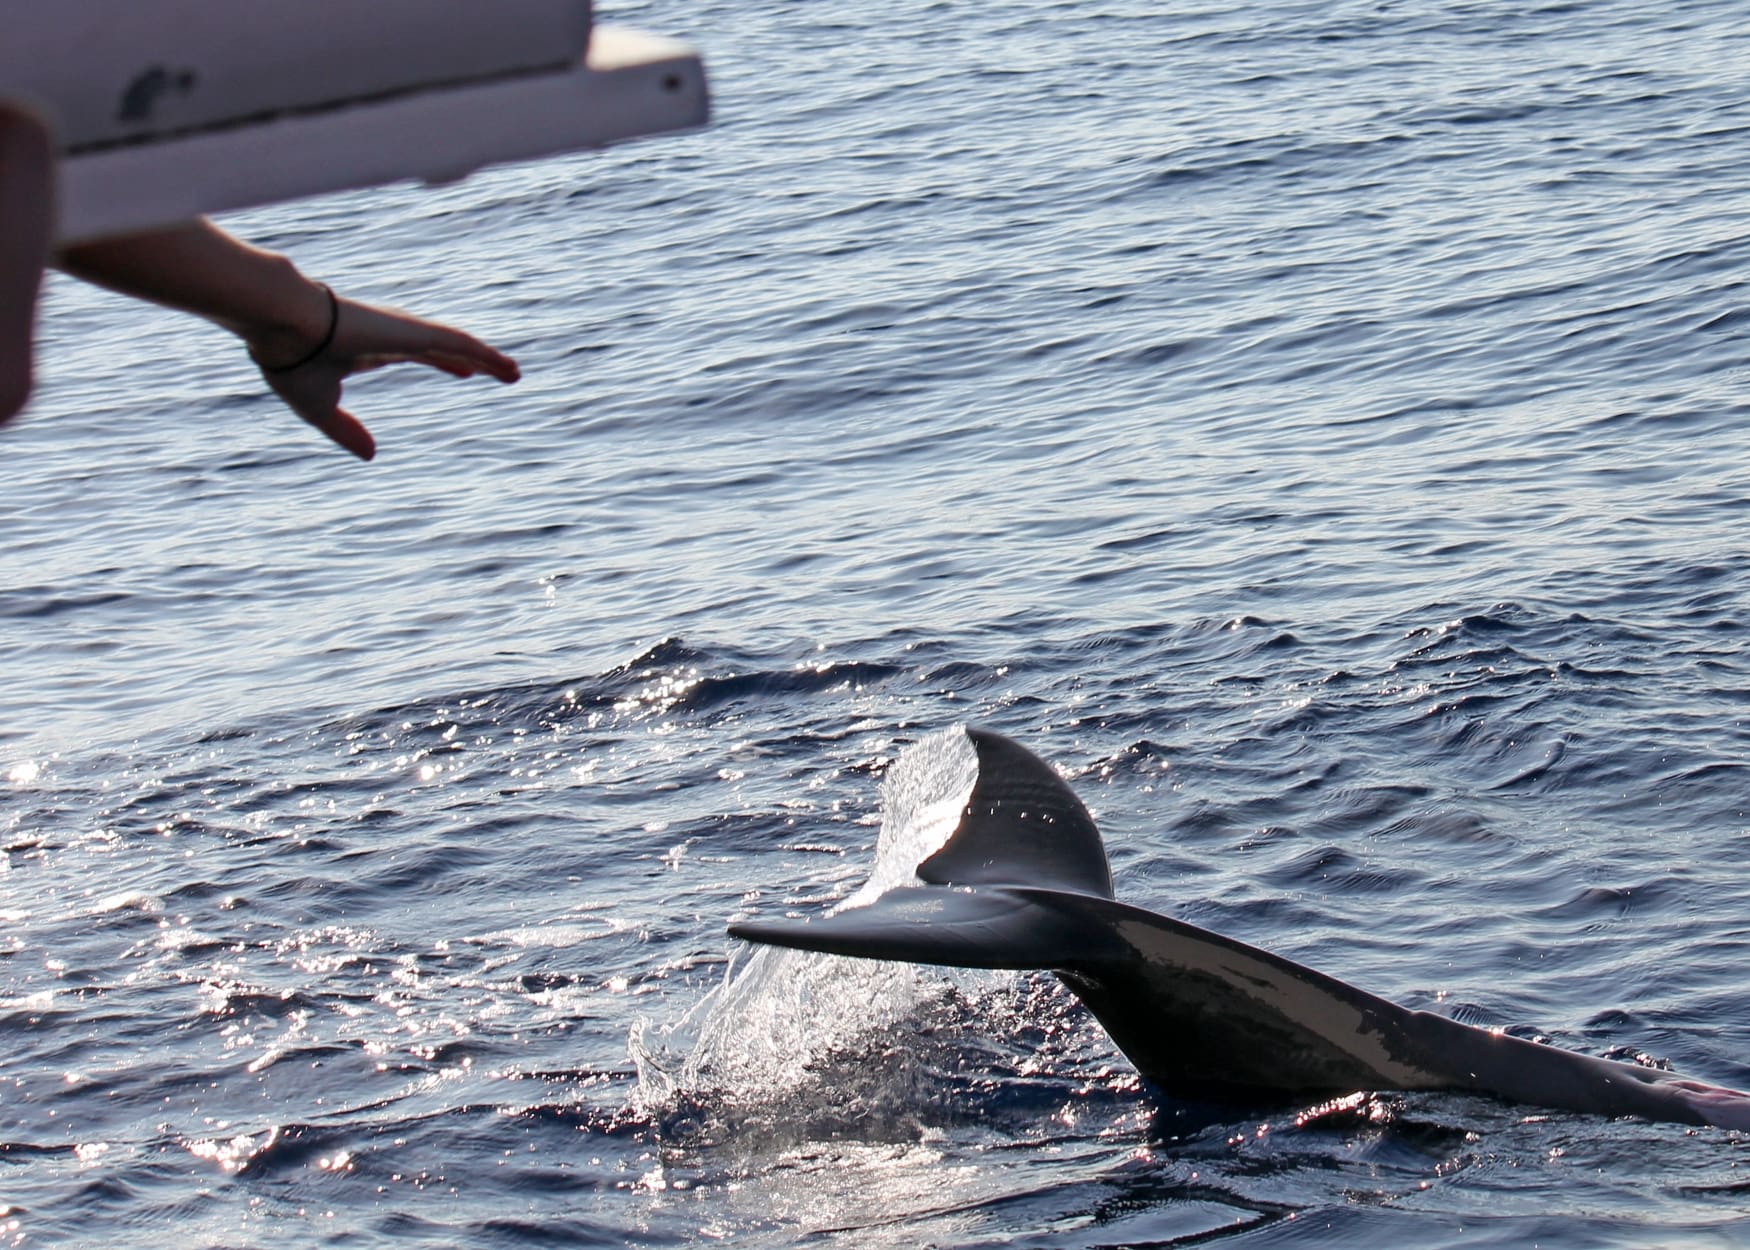 Tourist boats chasing and harassing dolphins can cause stress and pose risks.